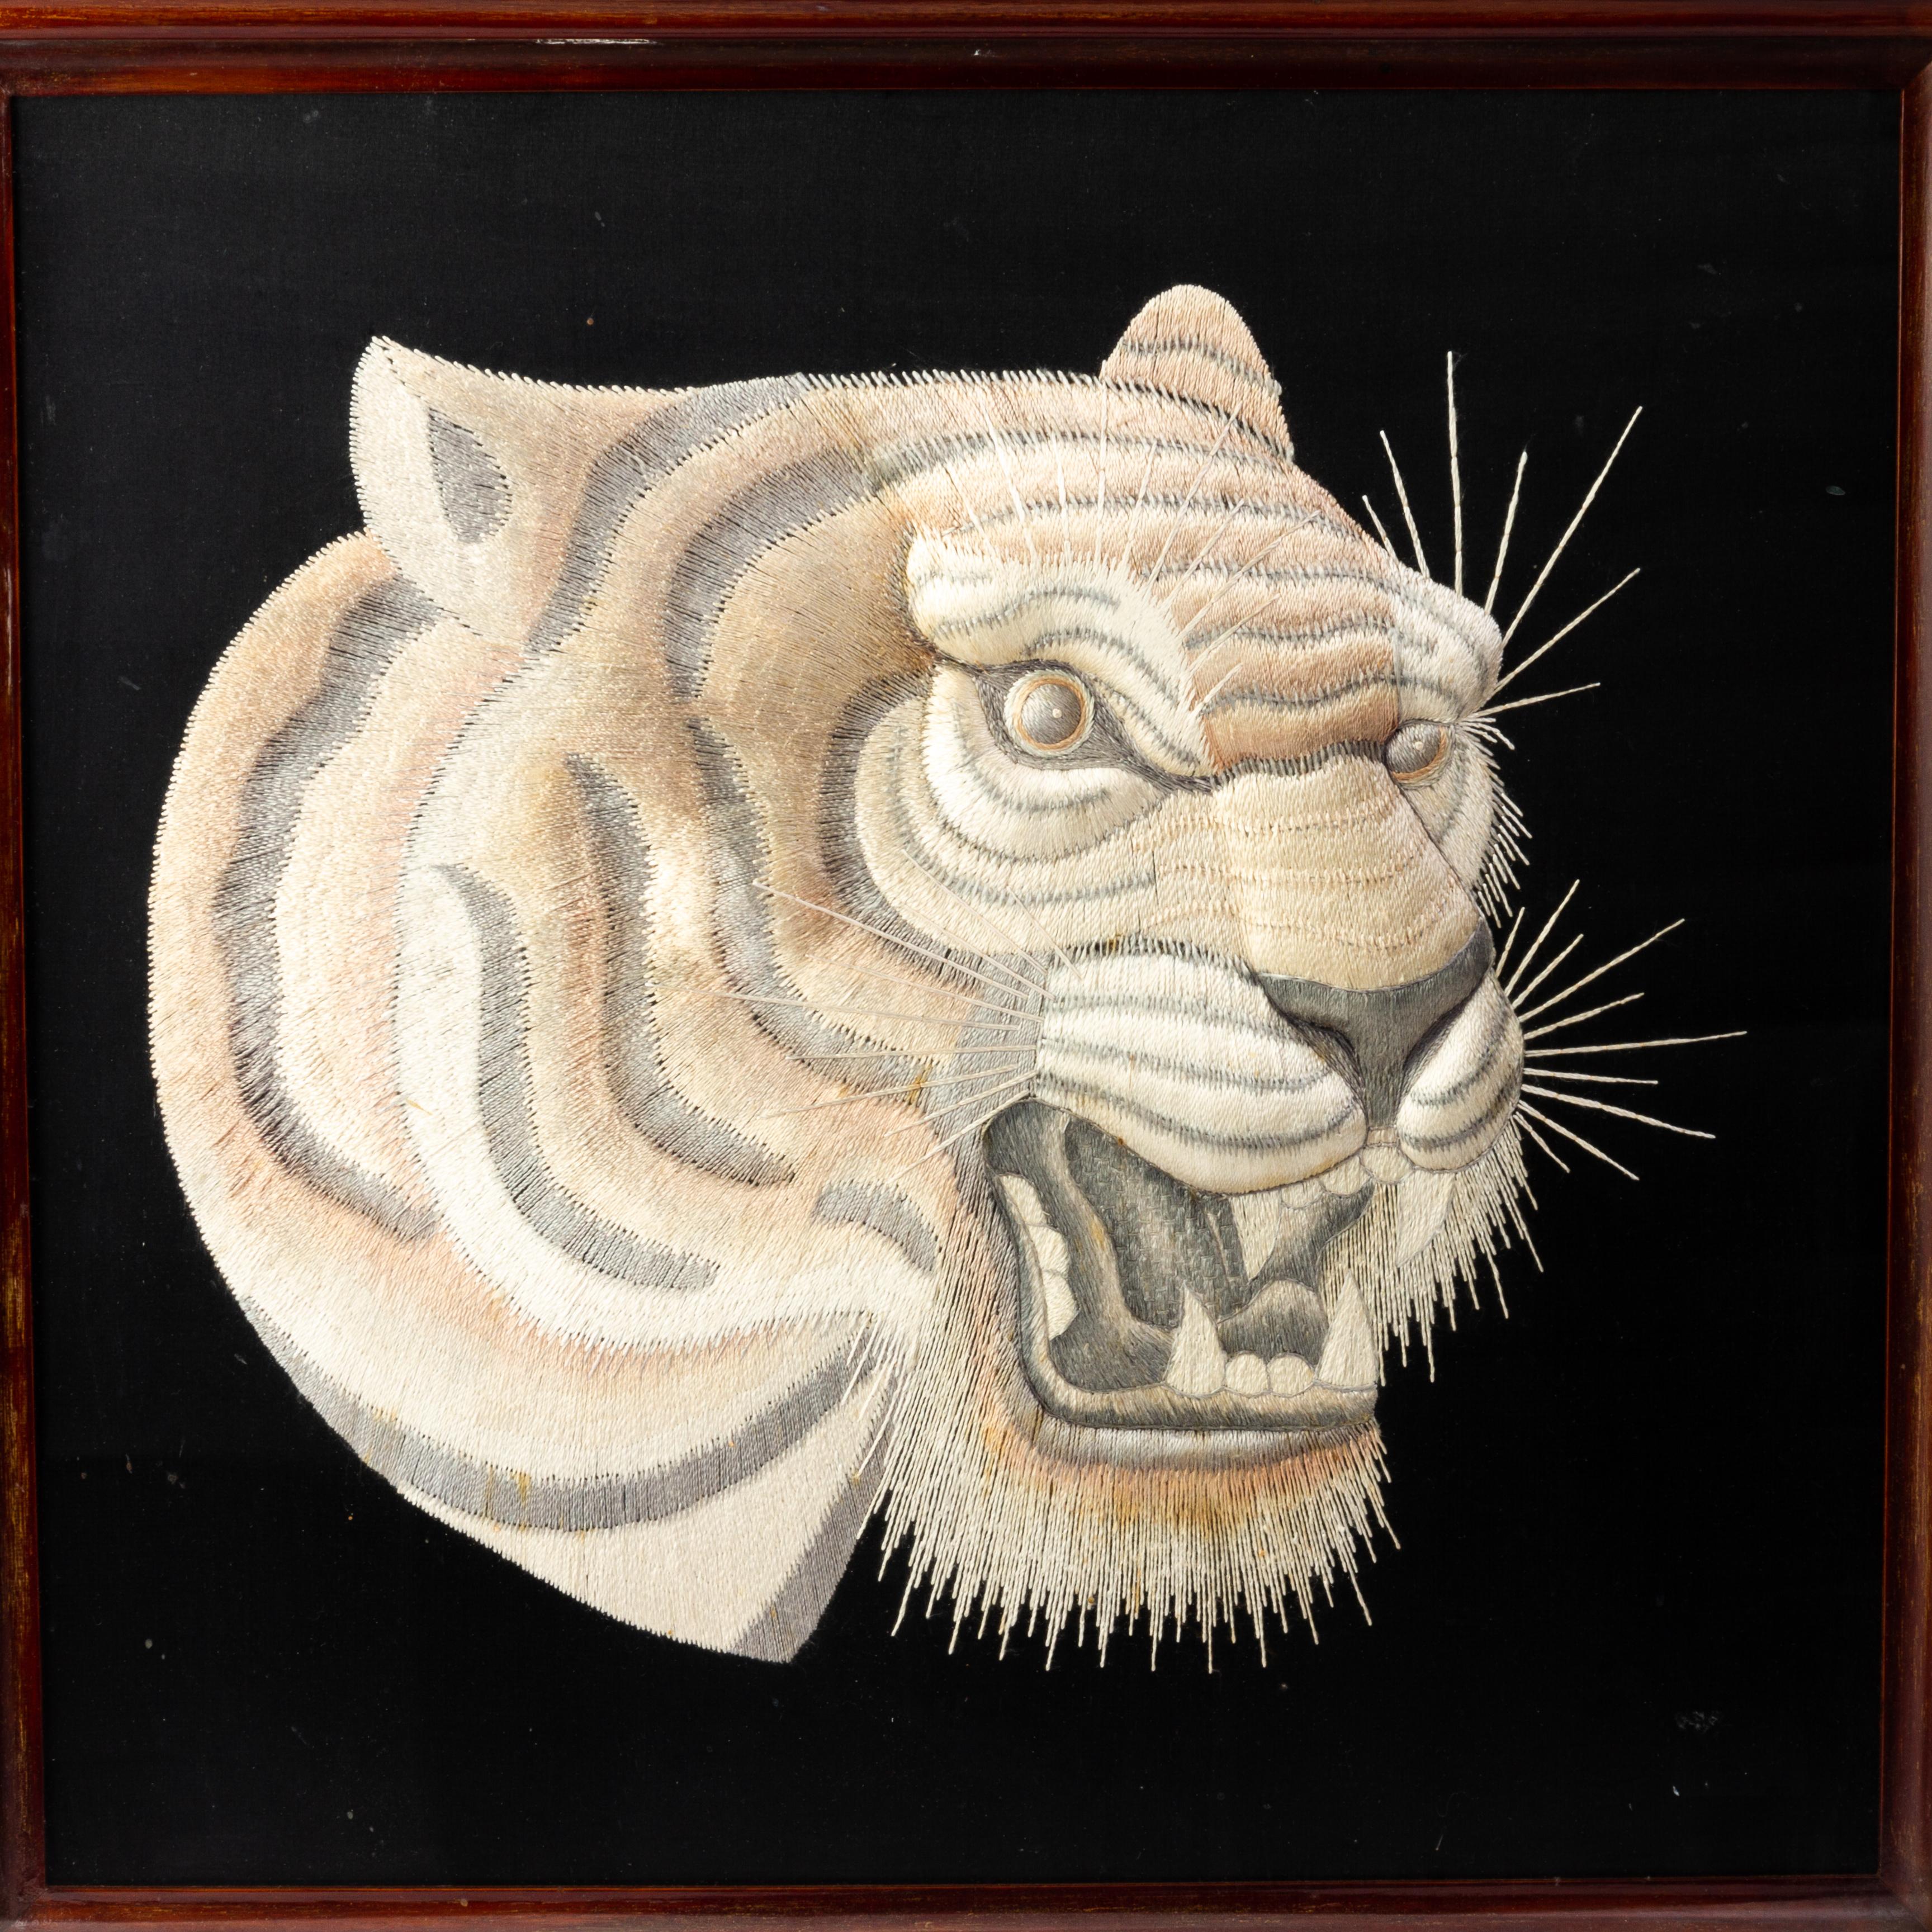 A very fine Japanese tiger embroidered silk screen panel.
Very good condition.
From a private collection.
Free international shipping.